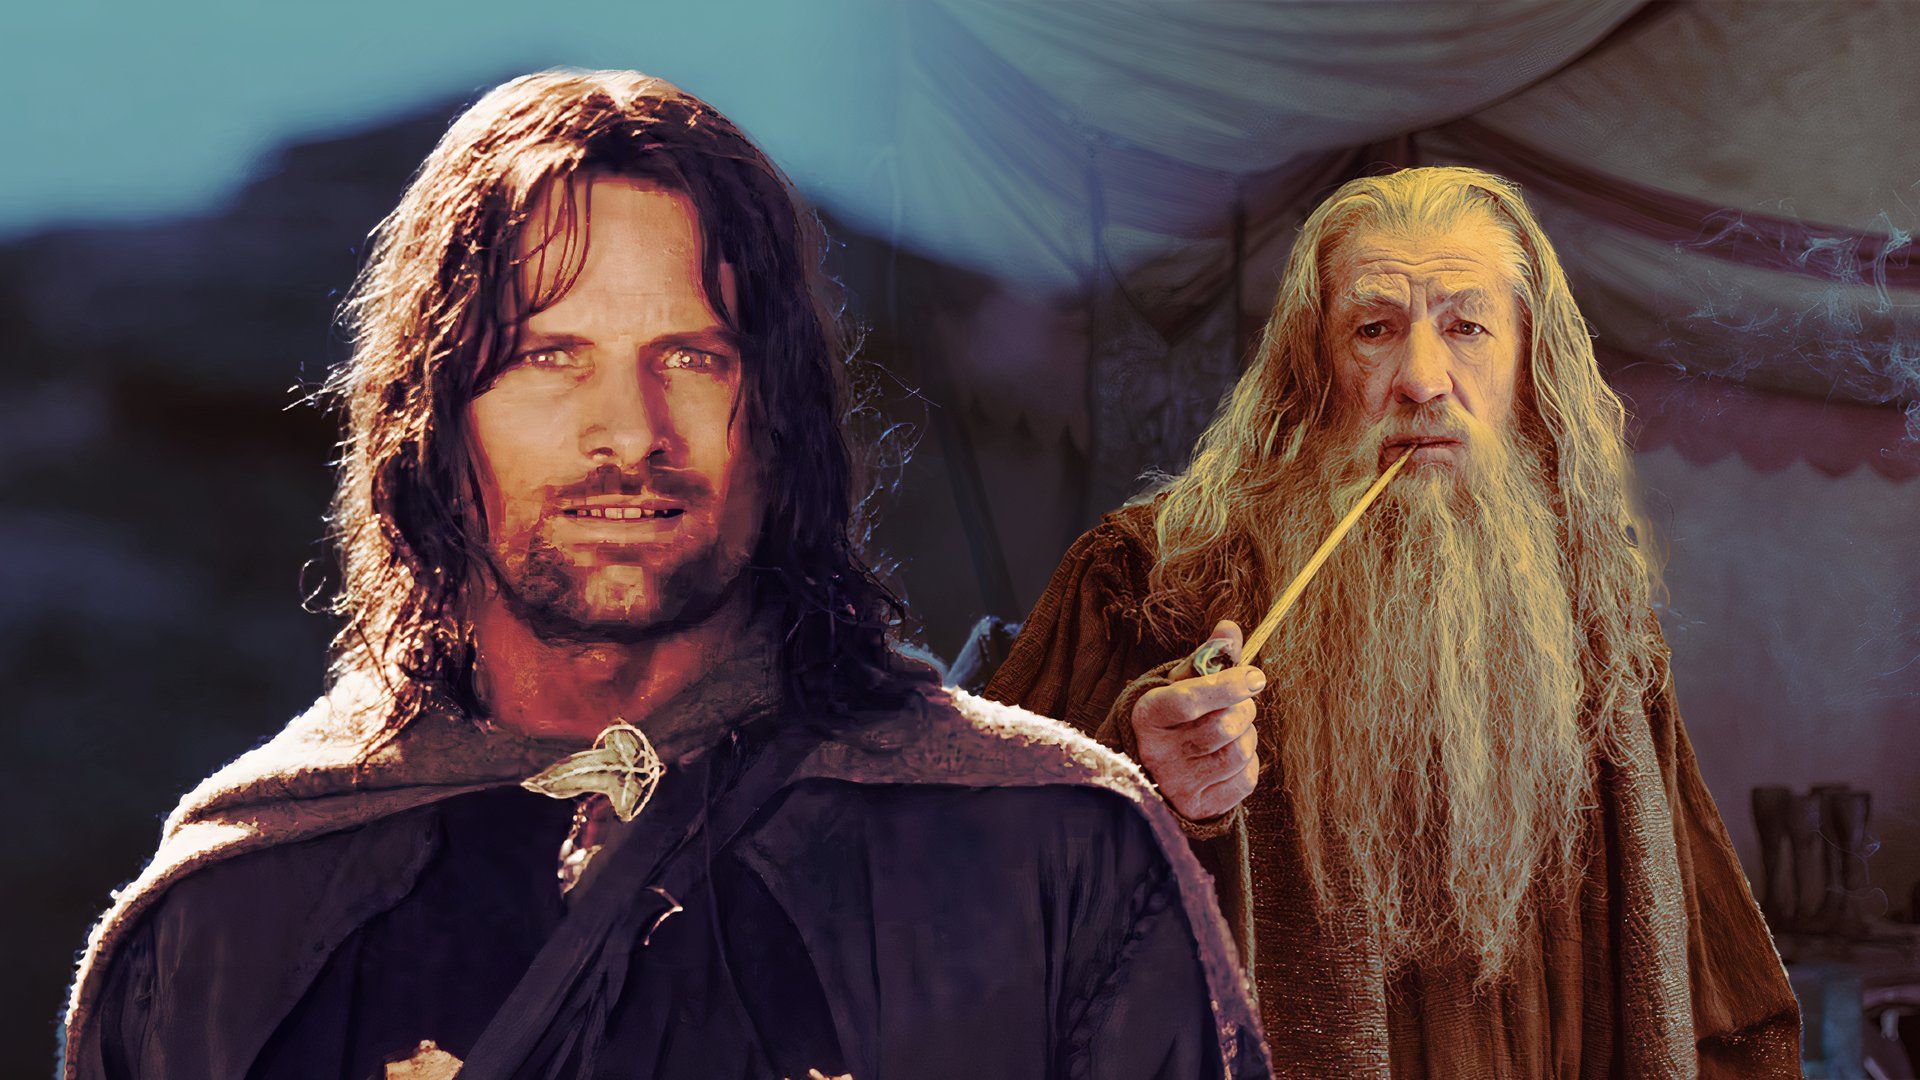 An edited image of Viggo Mortensen as Aragorn and Ian McKellen as Gandalf in The Lord of the Rings